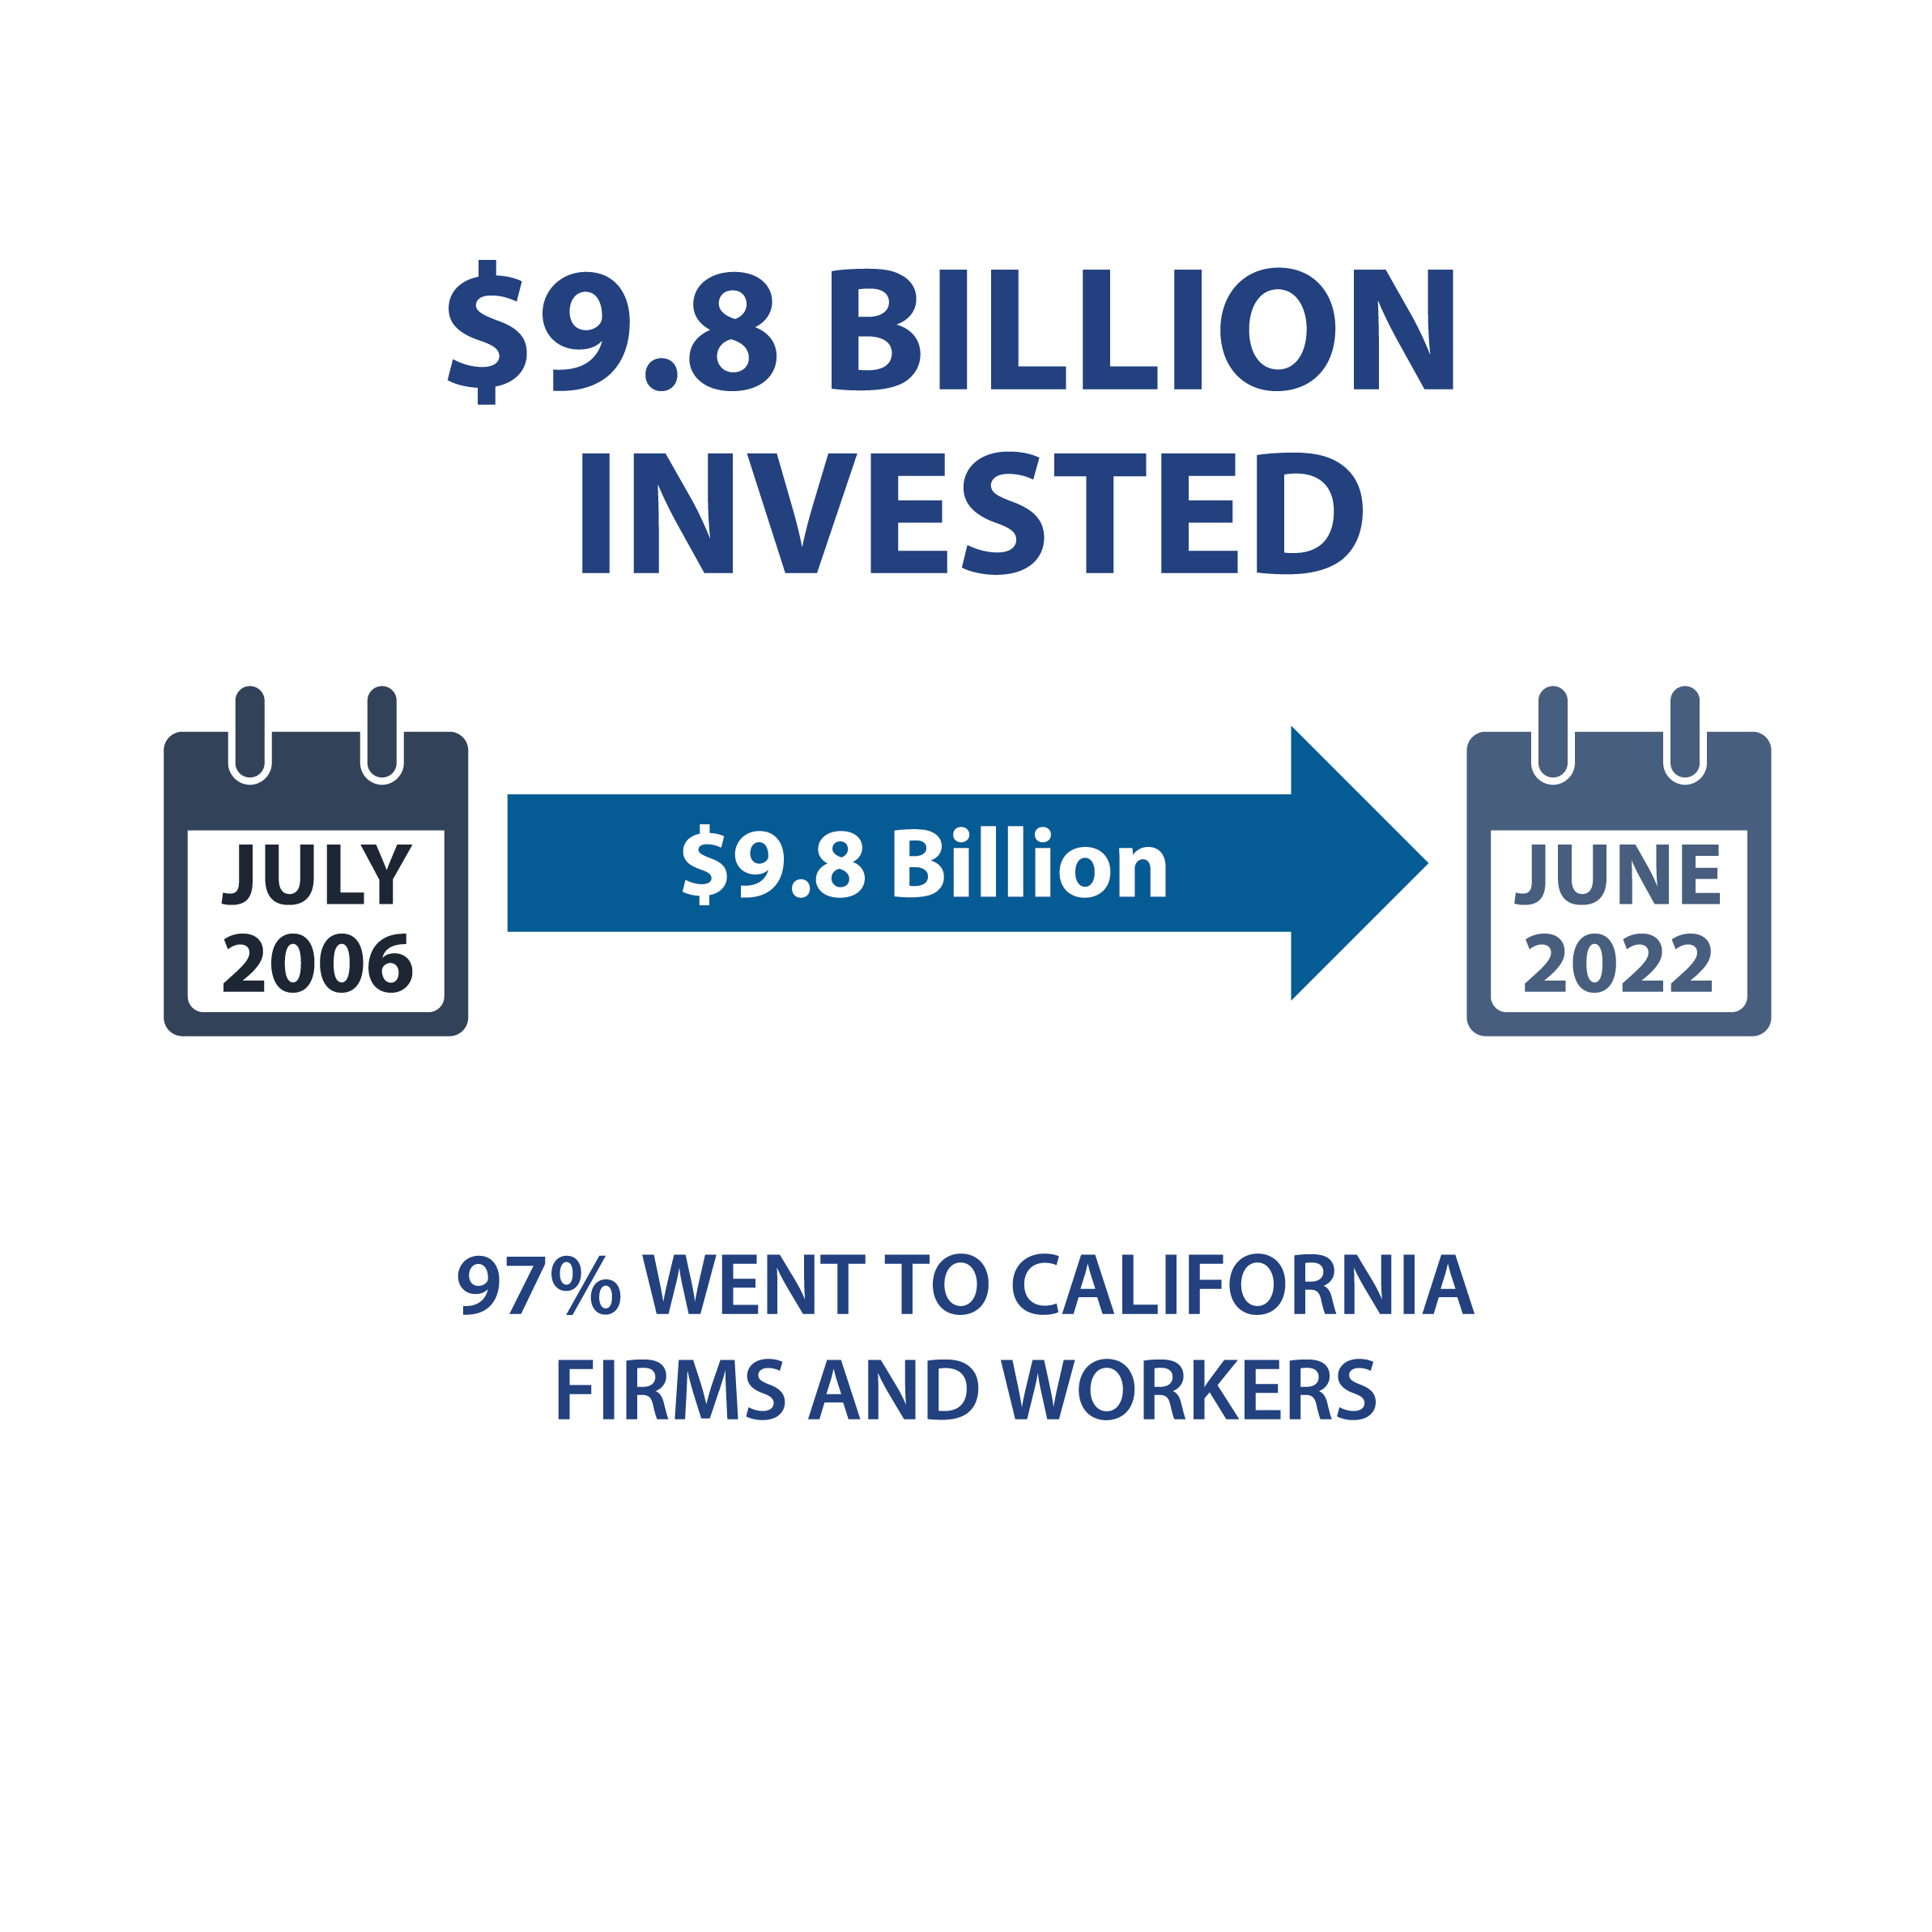 $9.8 Billion Invested, Calendar graphic of July 2006, arrowing pointing right with $9.8 Billion inside, Calendar graphic of June 2022, 97% went to California firms and workers